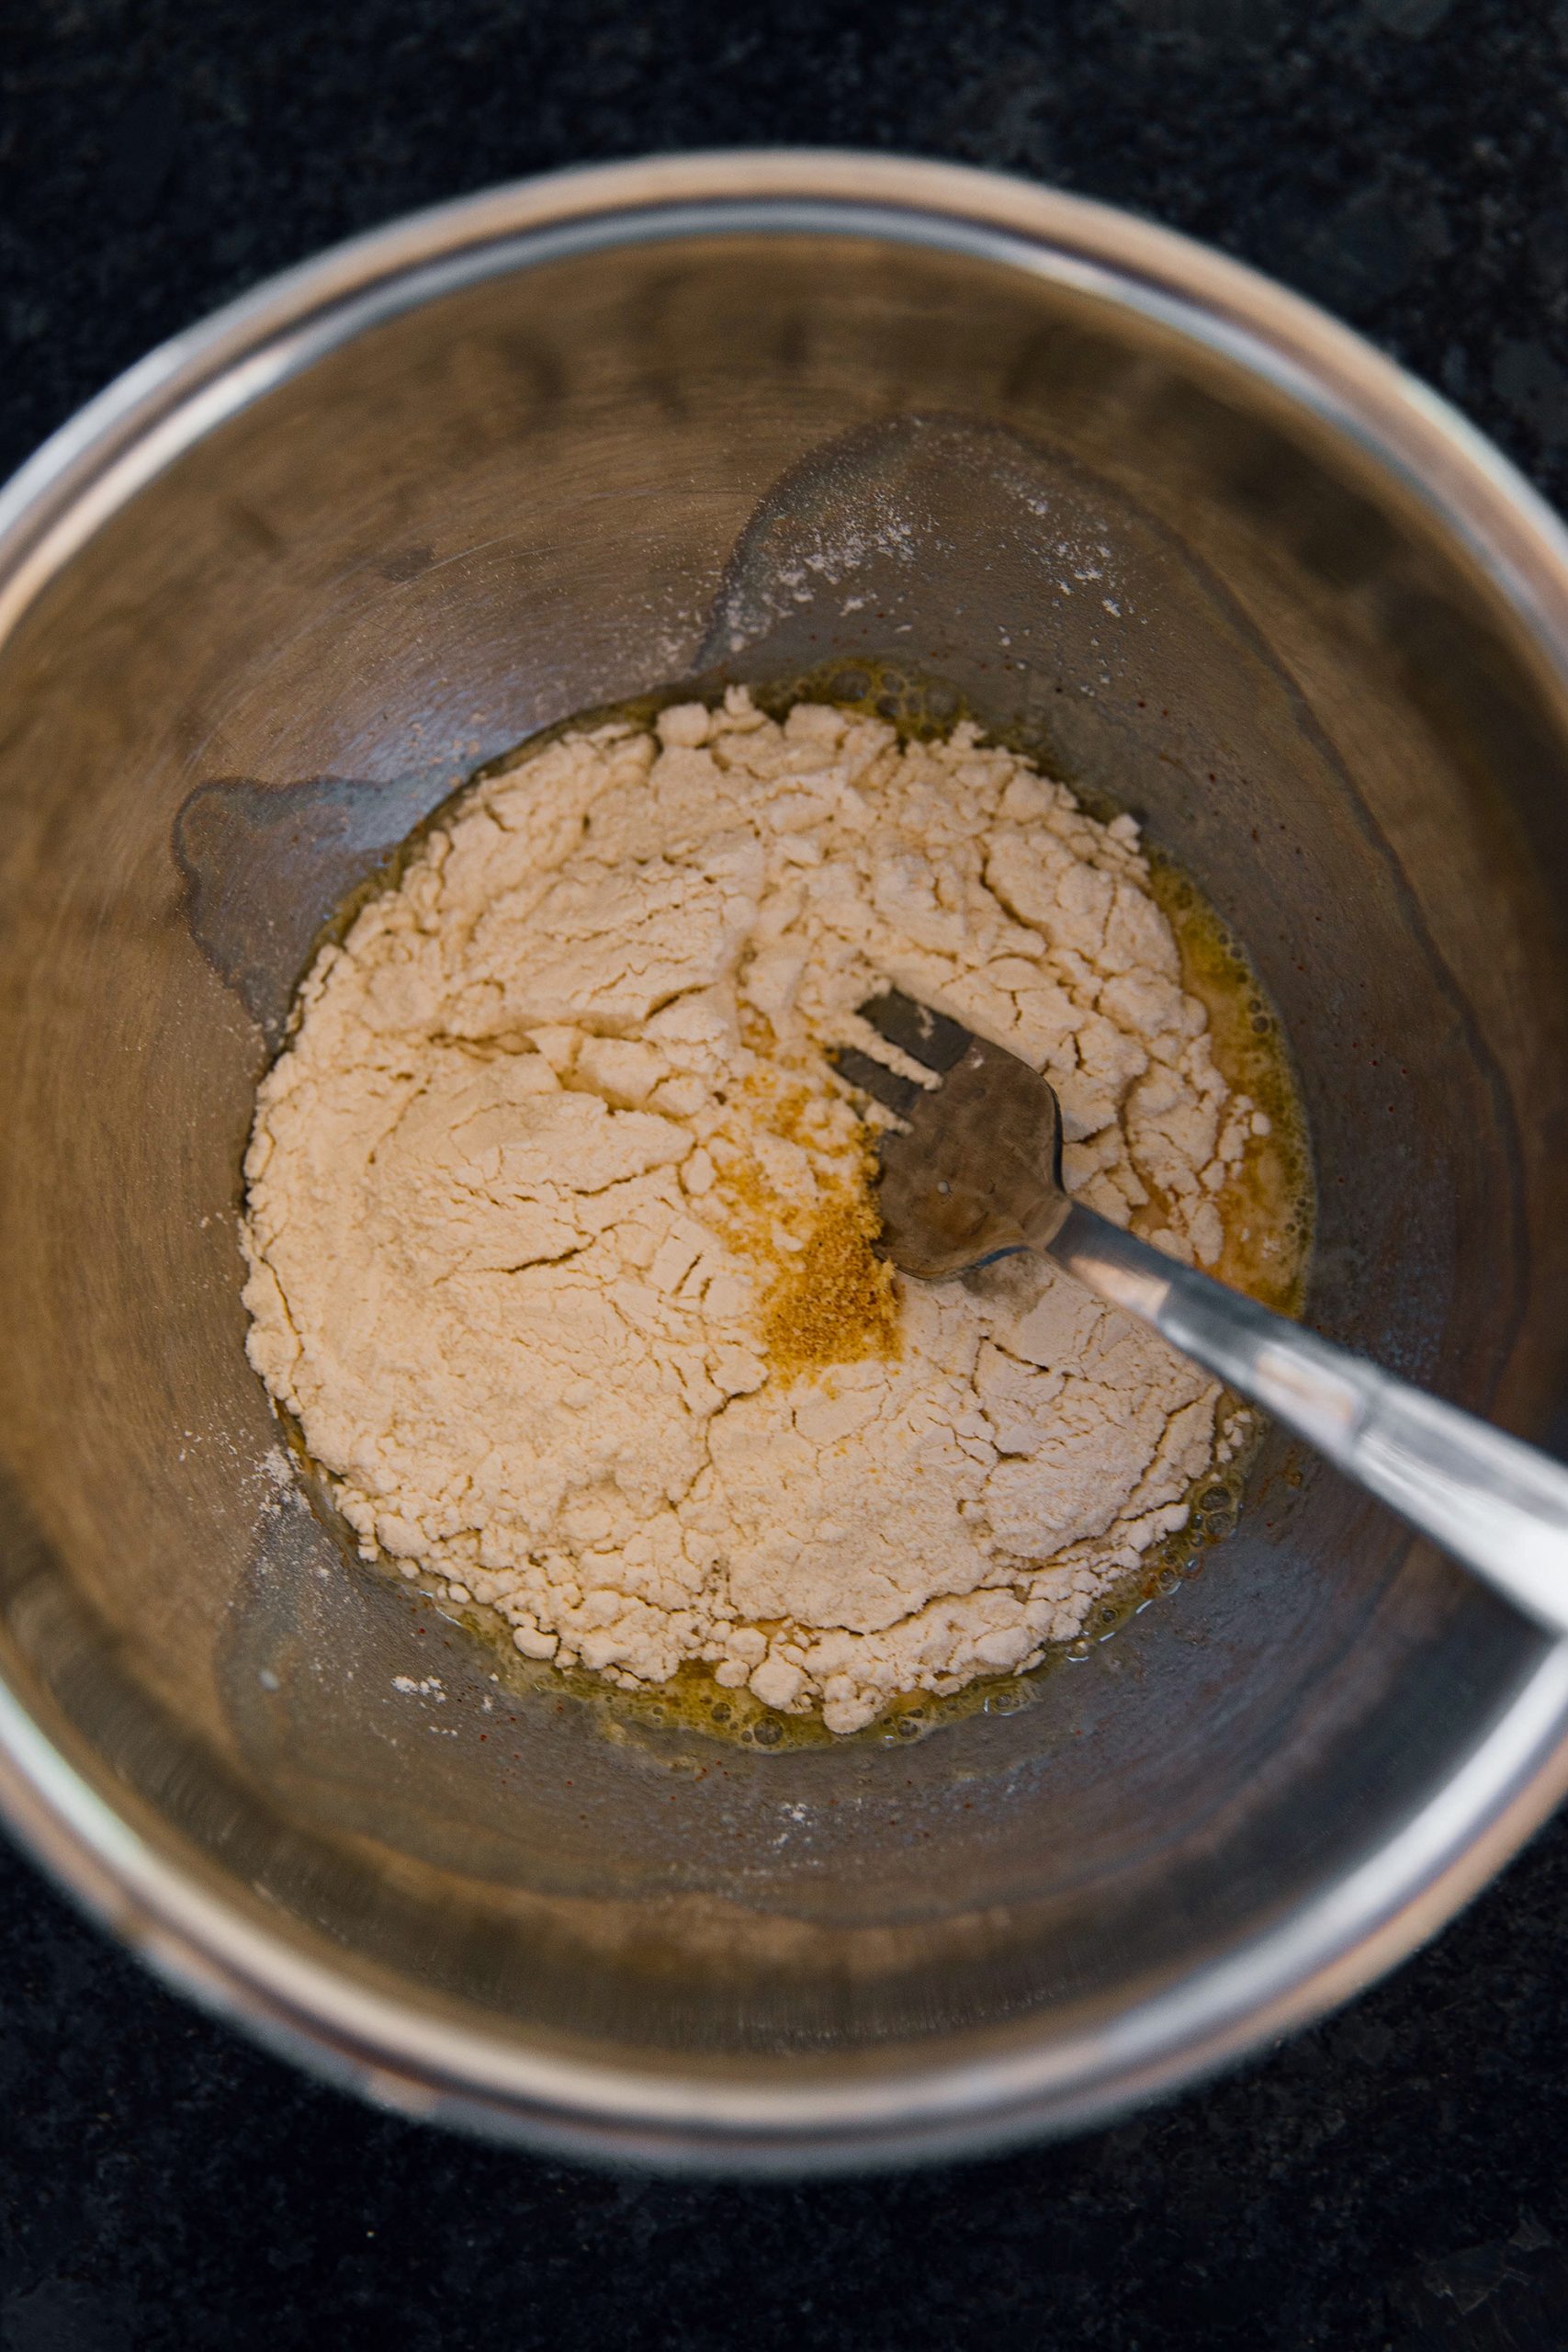 In a bag or bowl, add flour cornstarch, and seasonings.